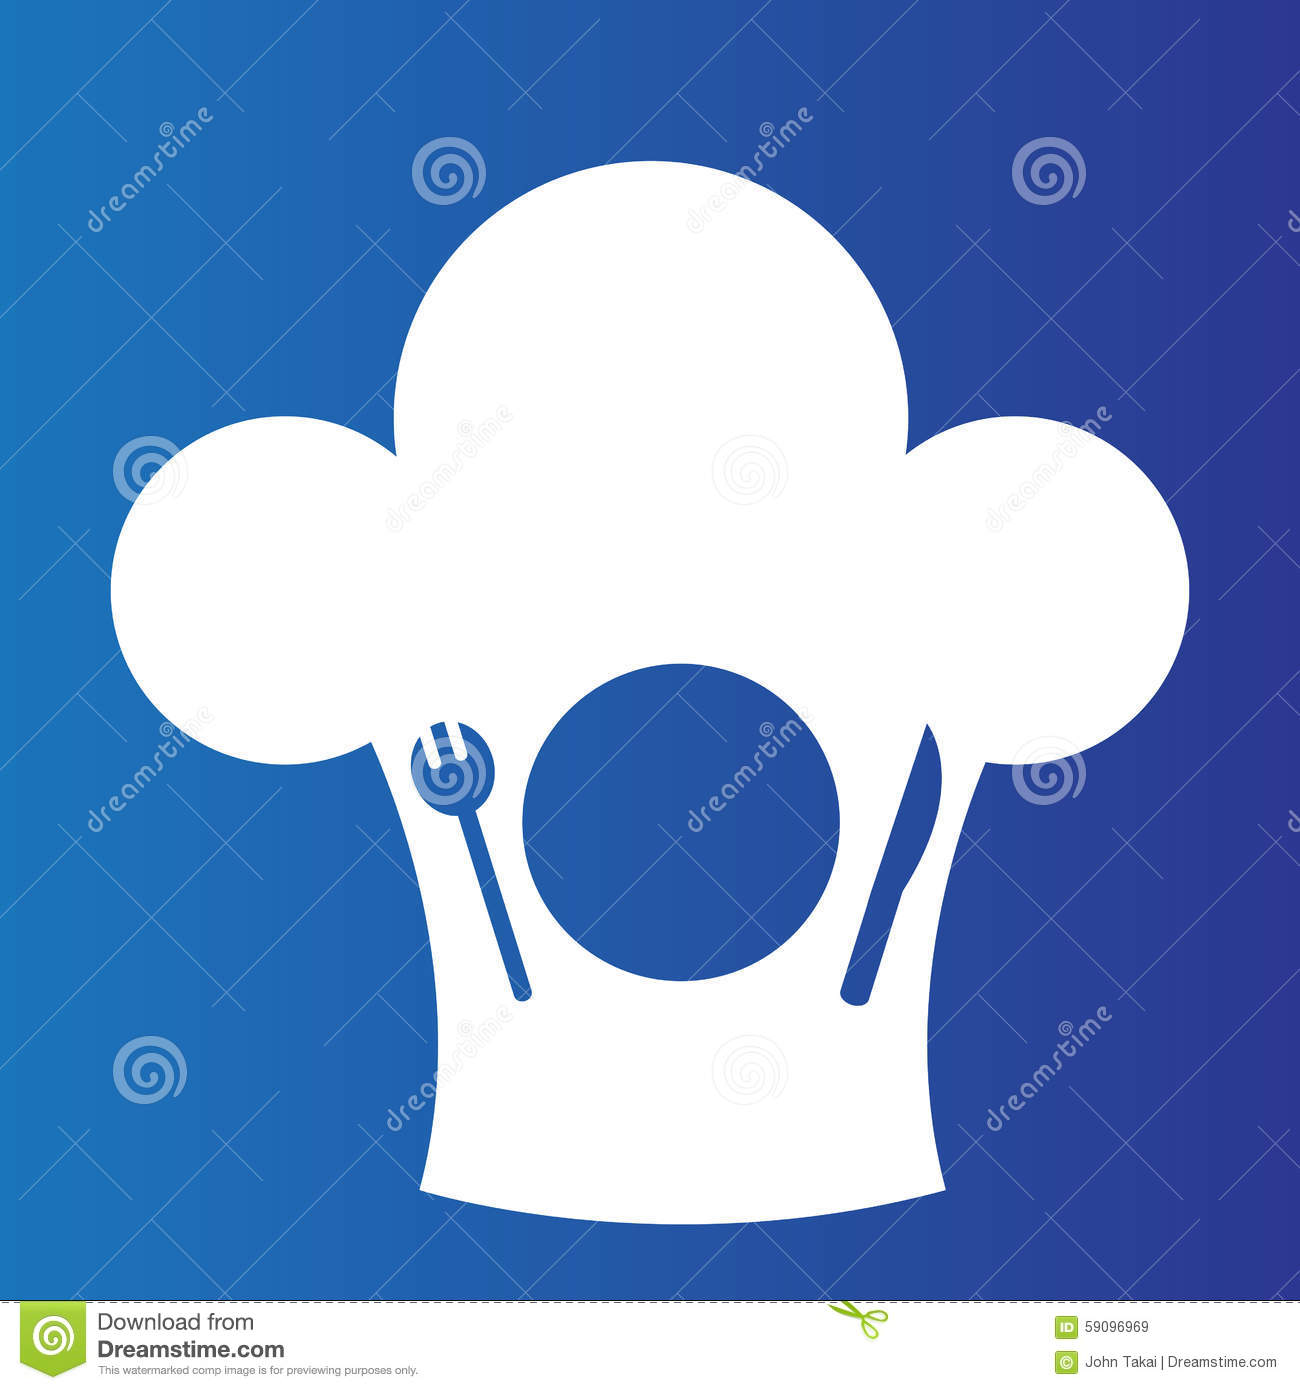 An Image Of A Meal Symbol With Chef Hat Toque